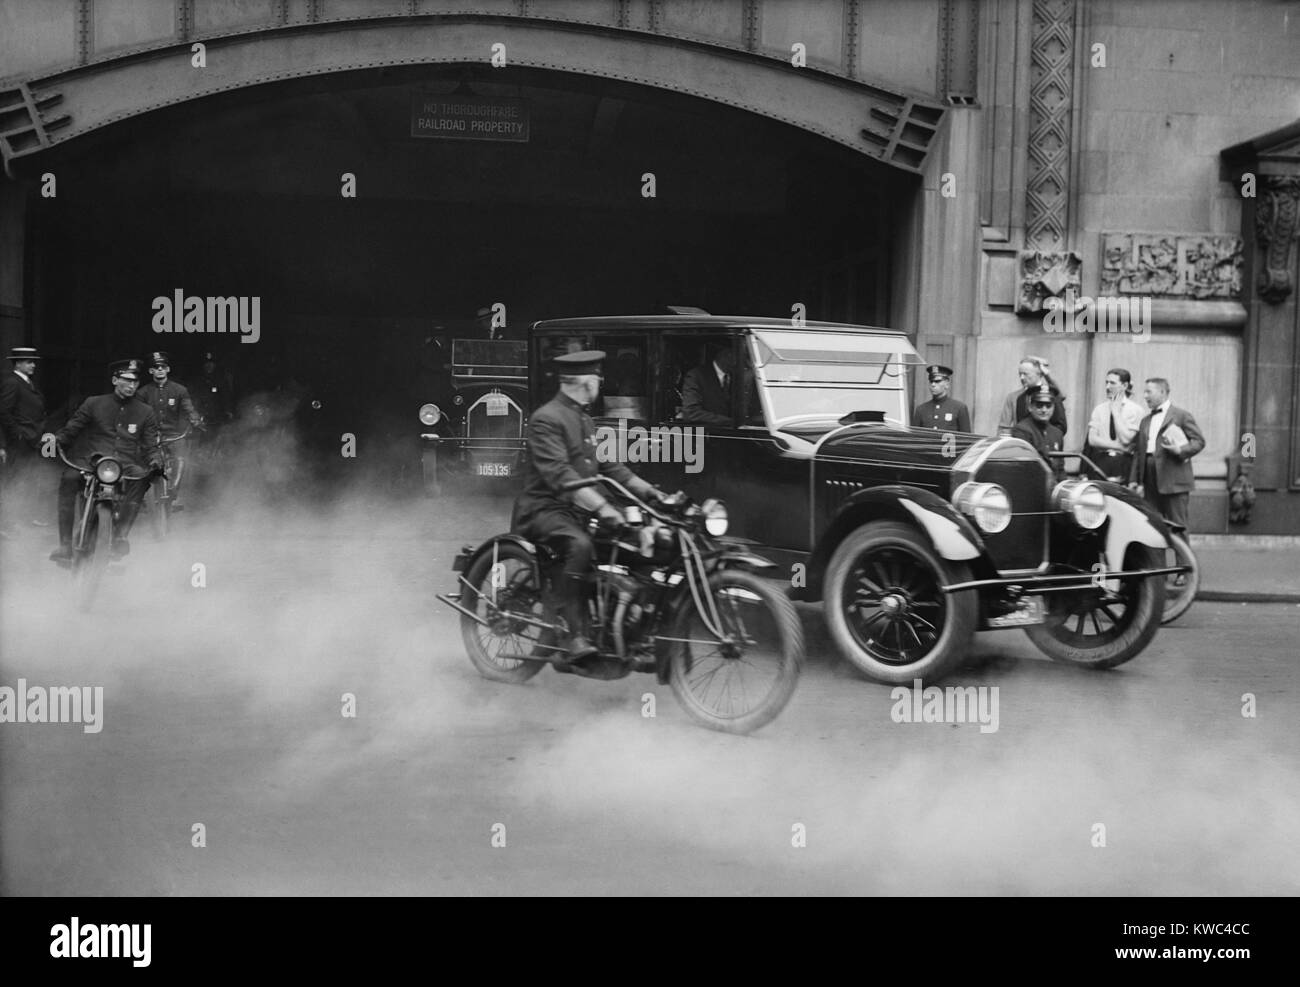 President Calvin Coolidge's car escorted by motorcycle police in New York City. The President and First Lady Grace Coolidge can be seen inside the car. Ca. 1923-29. (BSLOC 2015 15 173) Stock Photo